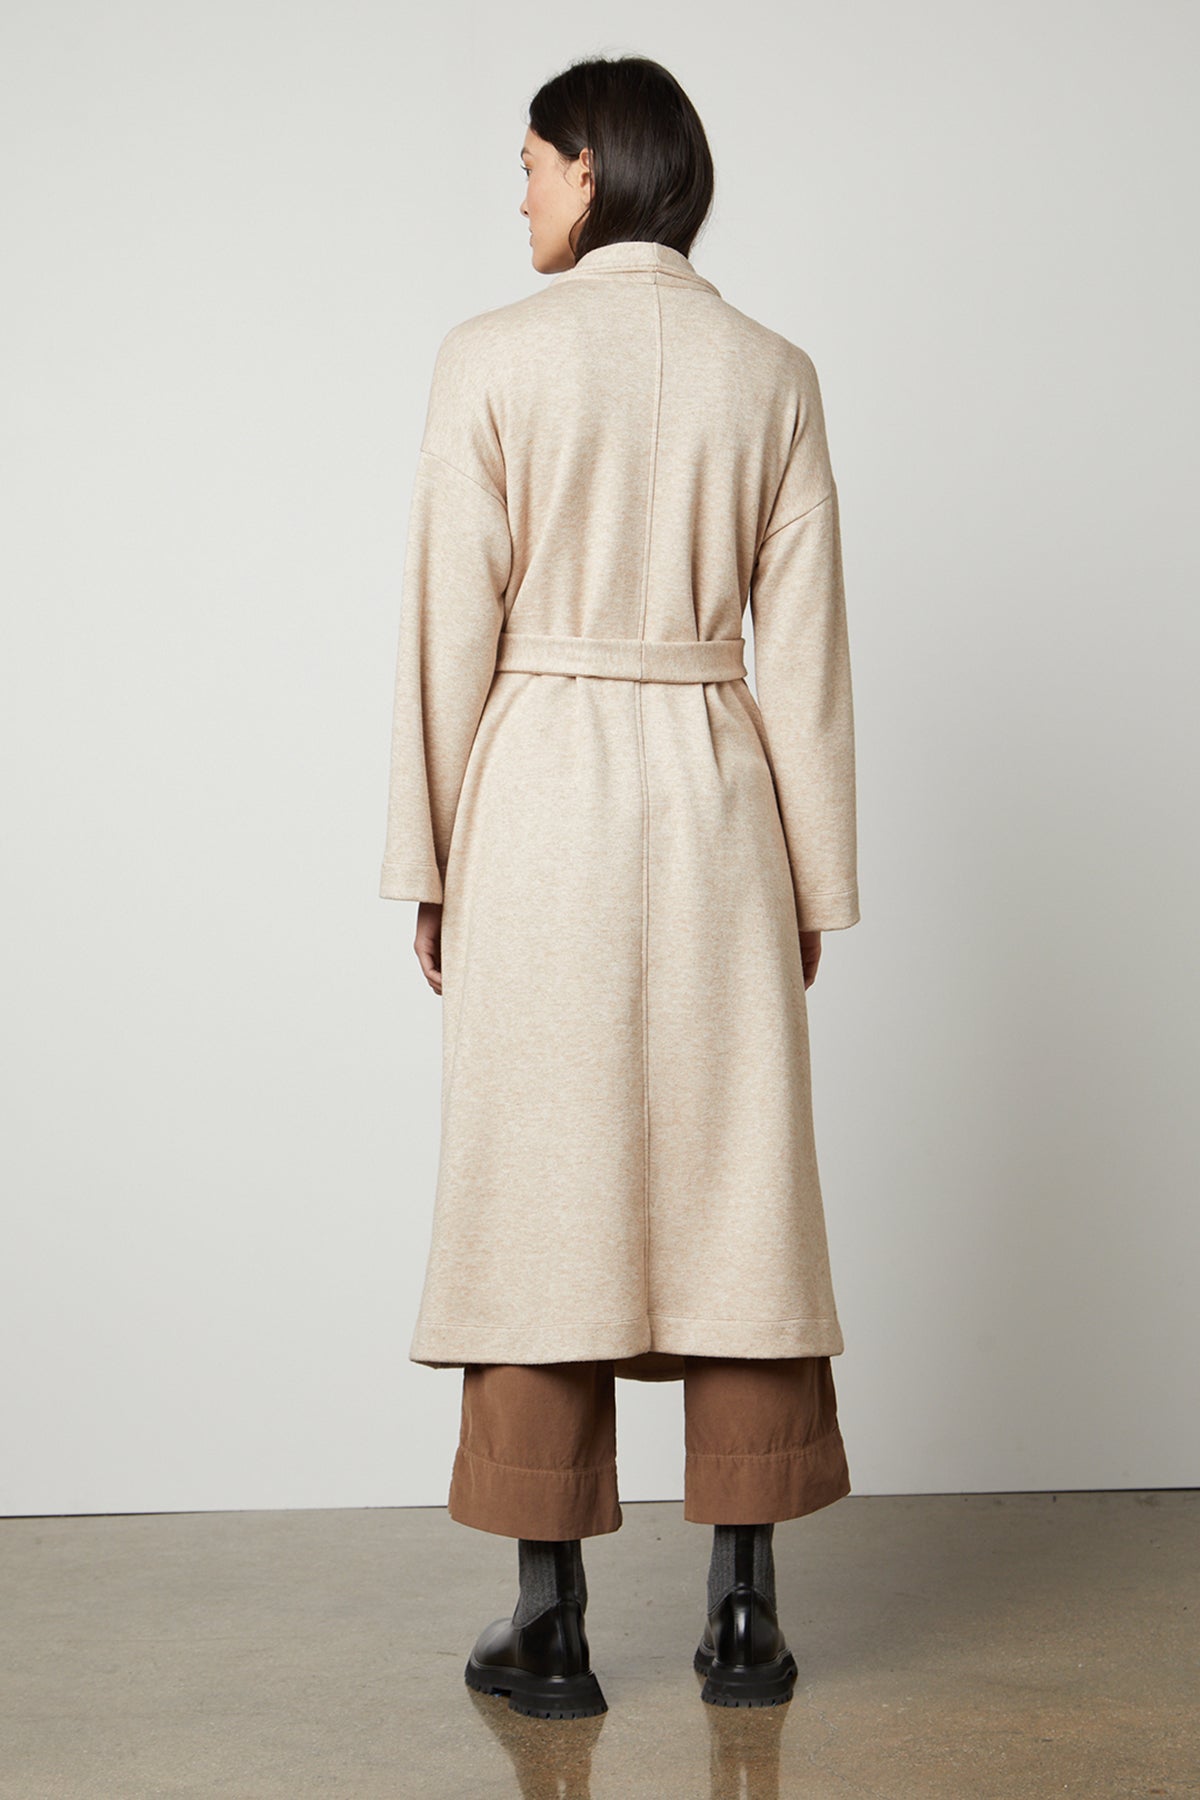 The back view of a woman wearing a Velvet by Graham & Spencer PATRICIA DOUBLE KNIT DUSTER CARDIGAN, a cozy layering piece in beige fabric.-35503542141121